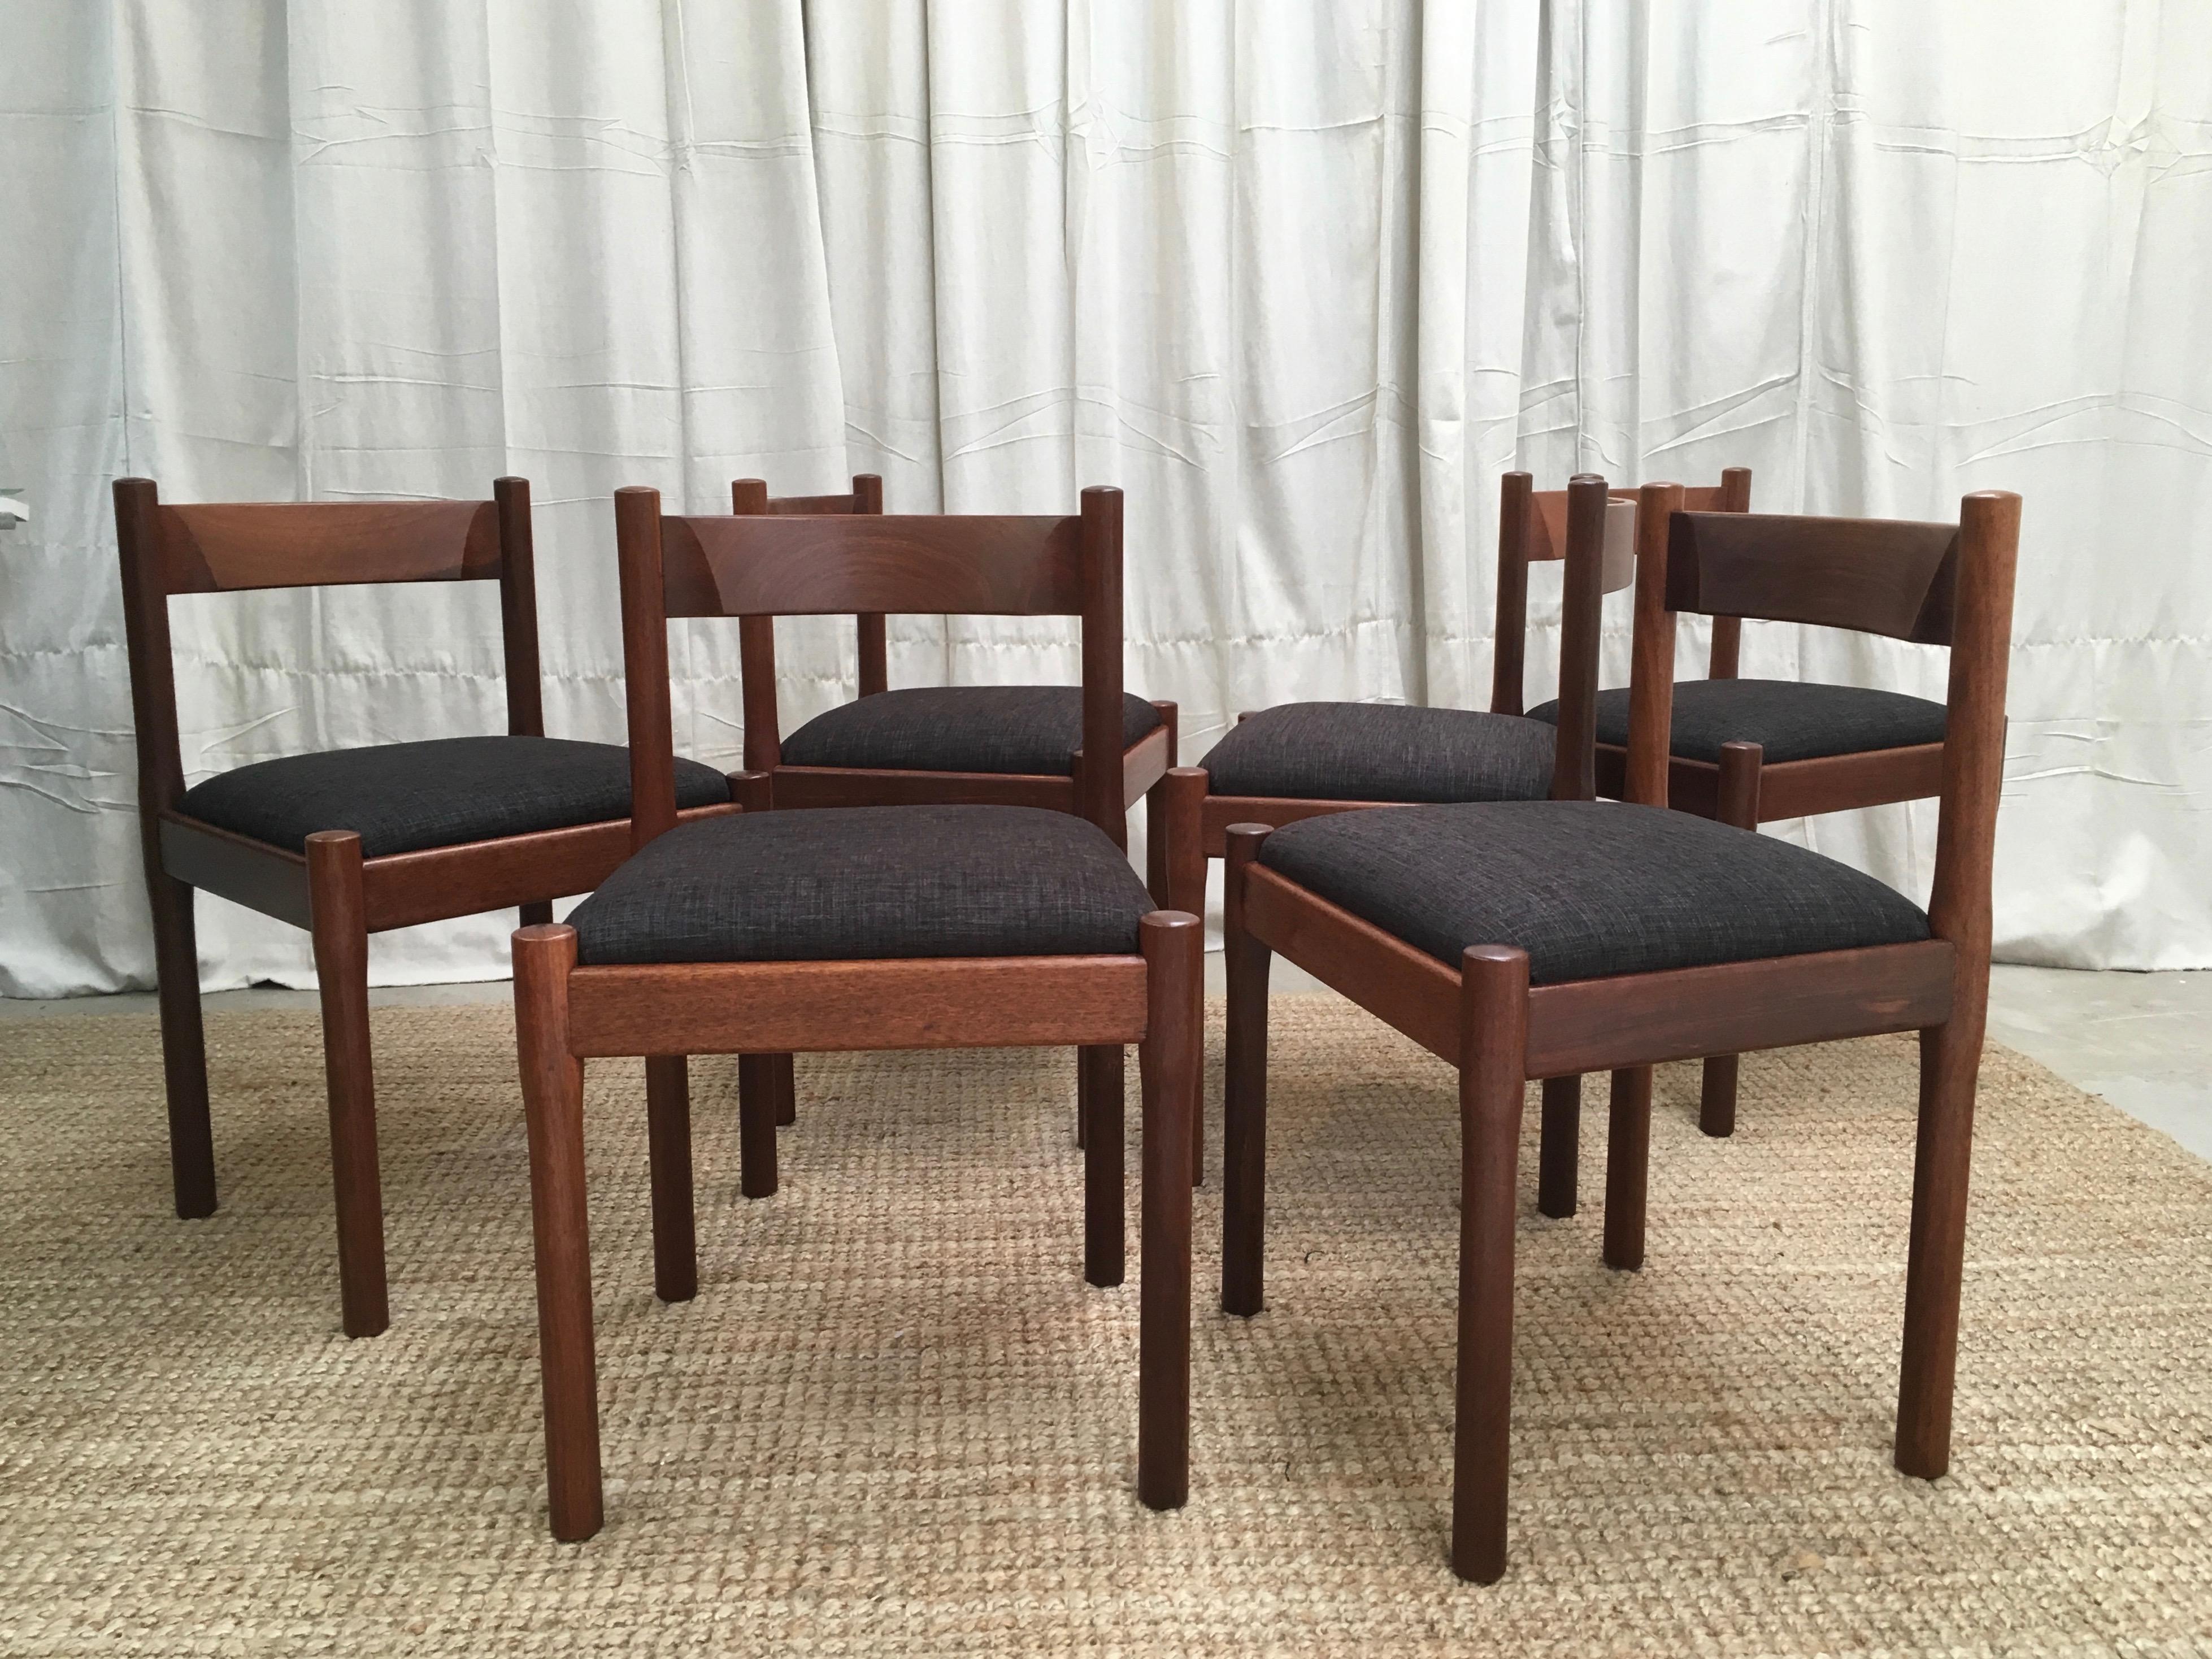 Mid-20th Century 6 Carimate Chairs Magistretti , Copies by CATT Furniture, 1967 In Jarrah Timber